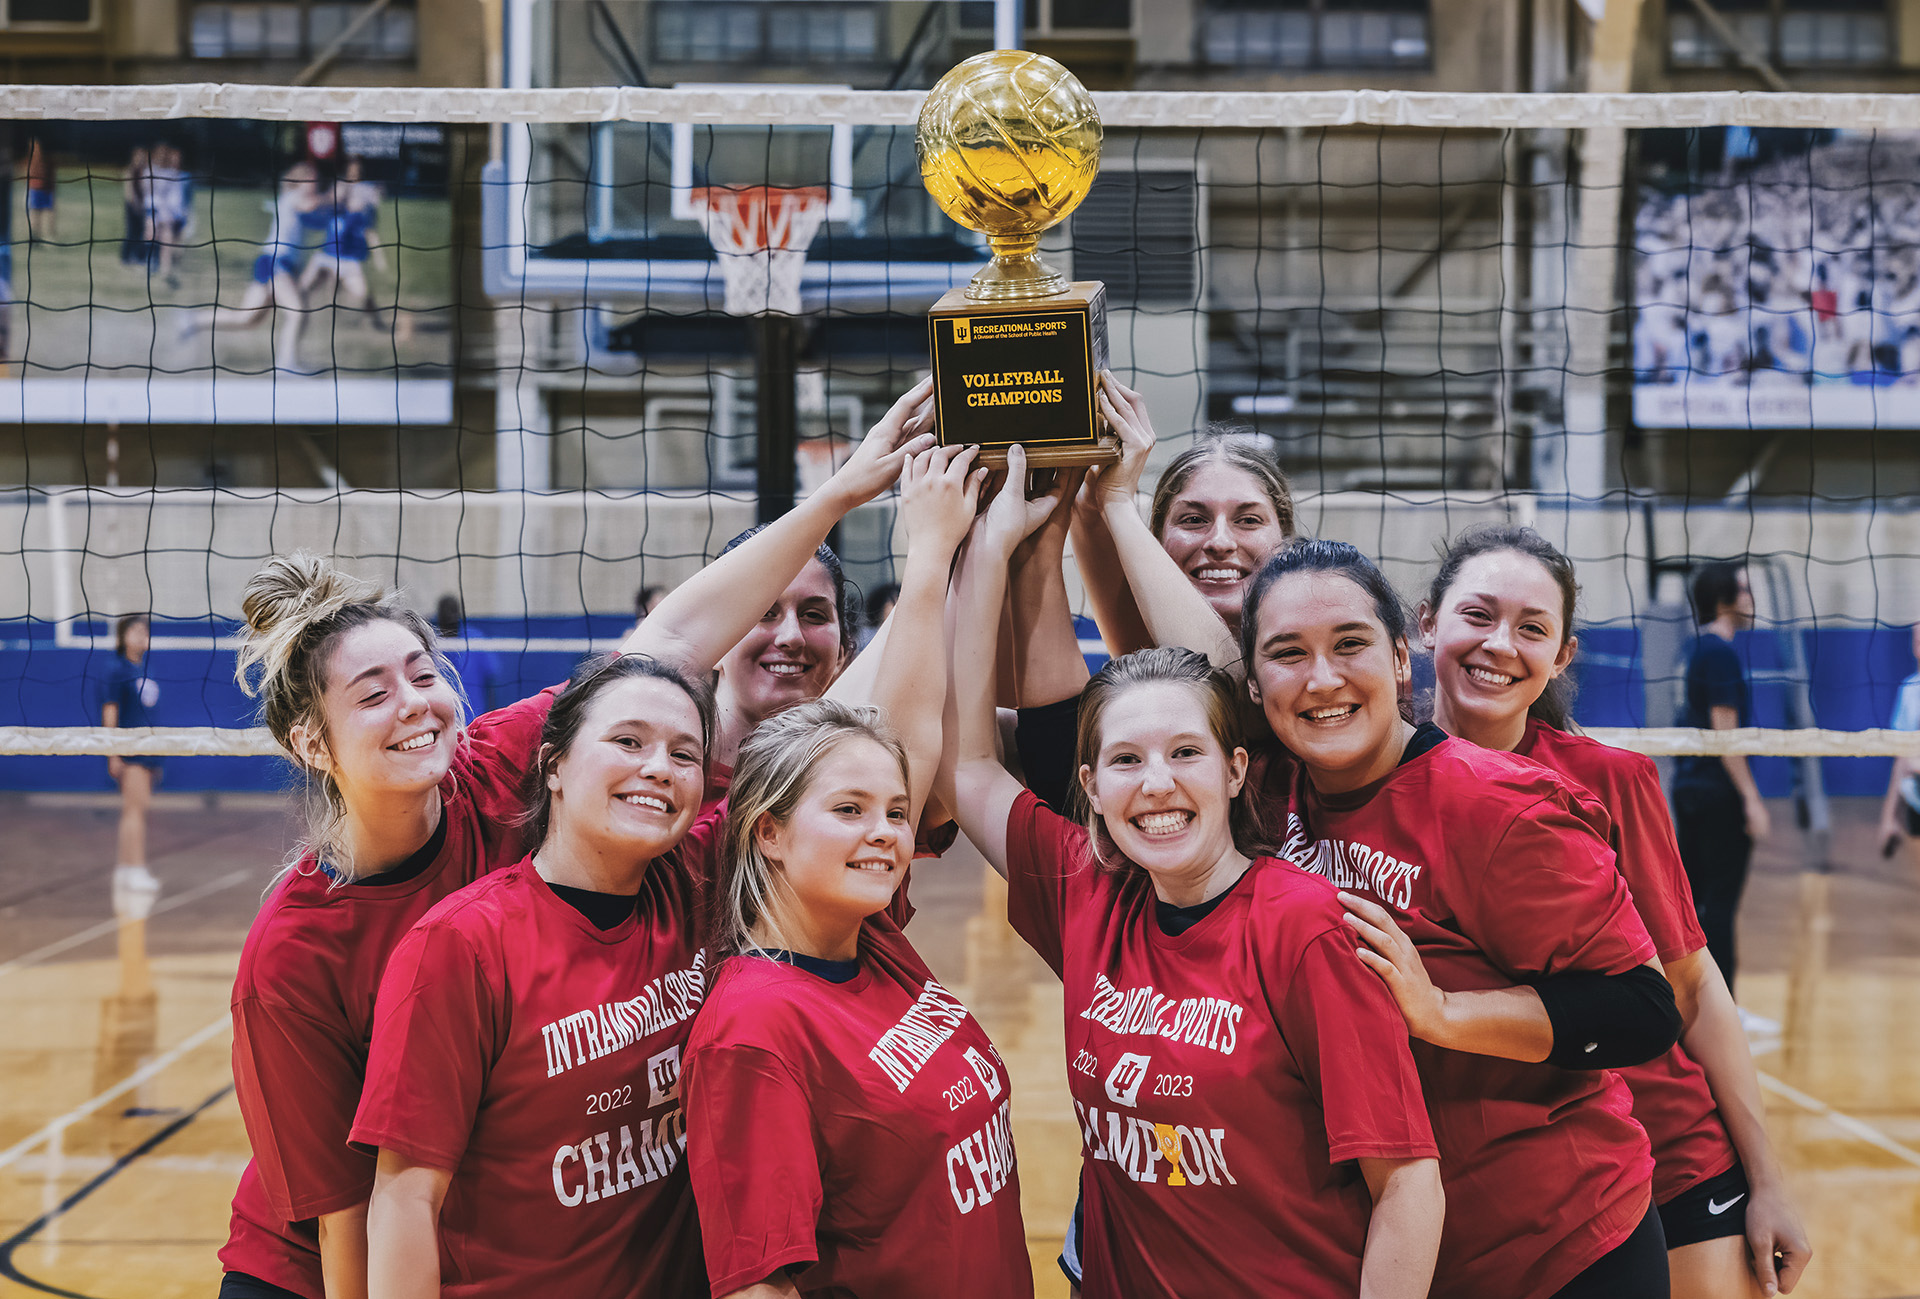 A group of students celebrates around an intramural trophy.